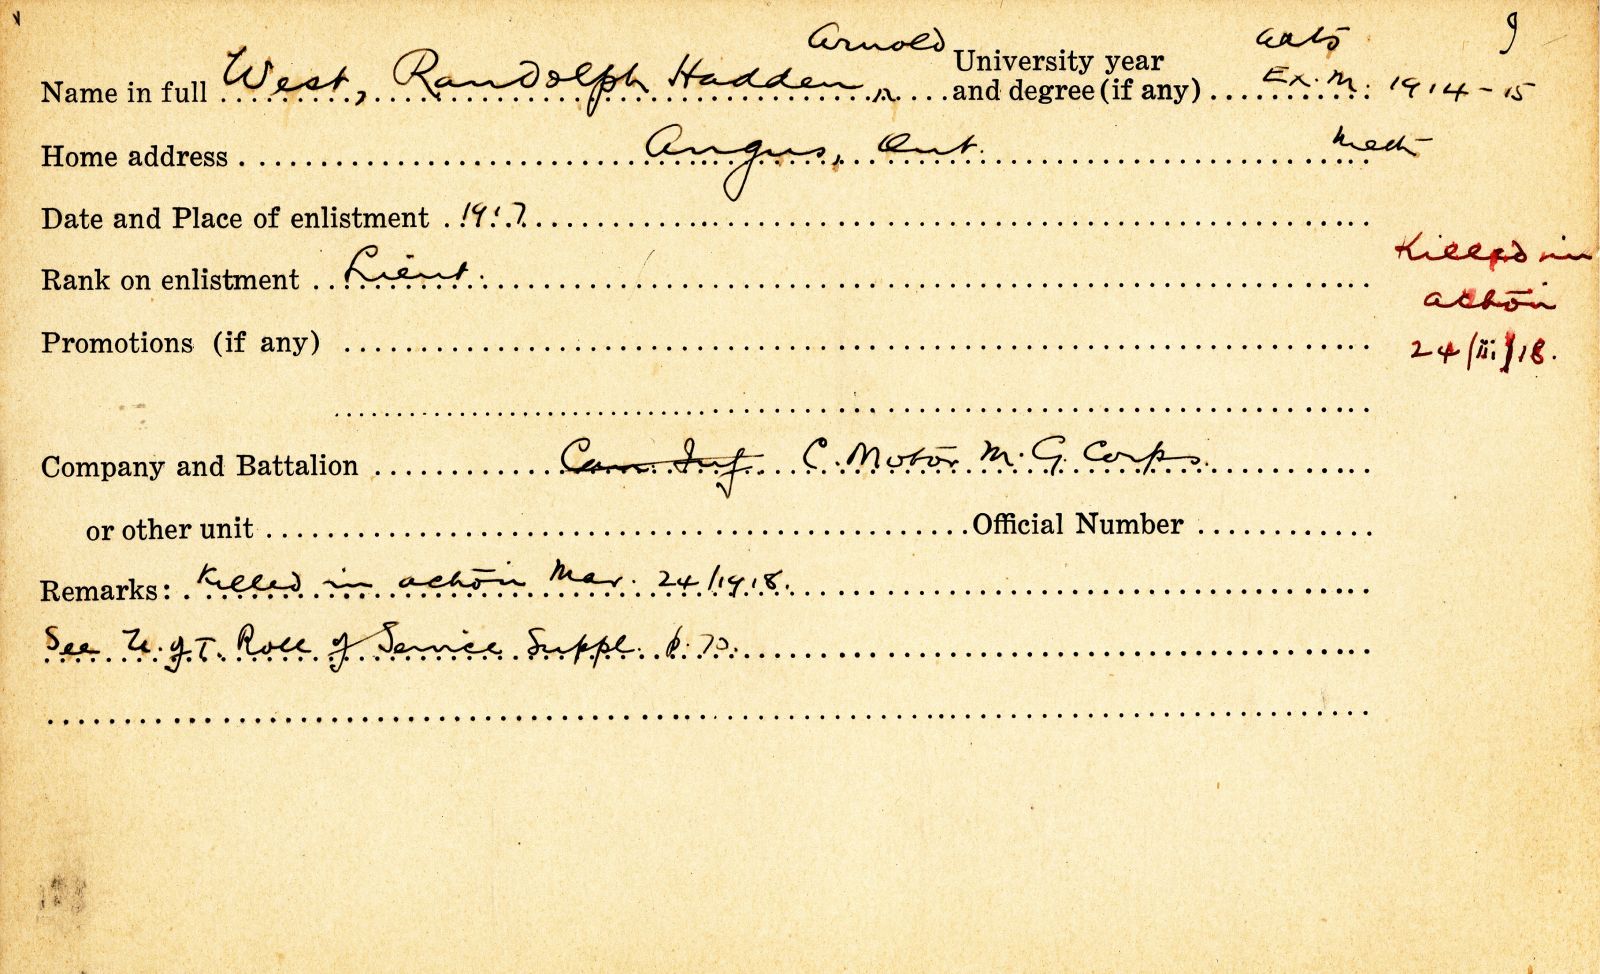 University Military Service Record of West